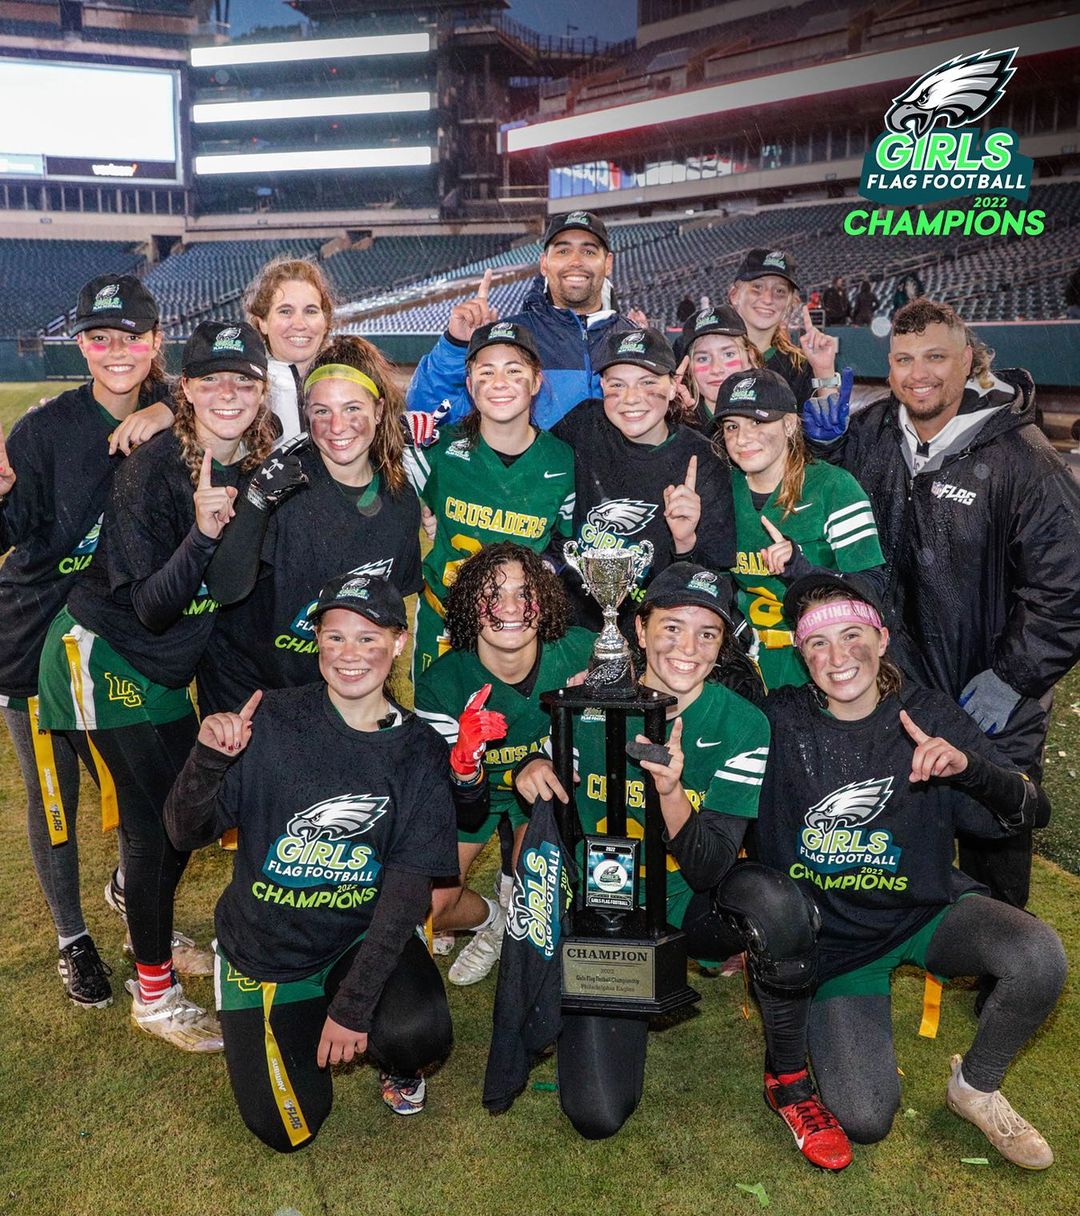 Congratulations to @lc_girlsflagfootball, our 2022 Eagles Girls Flag Football Ch...